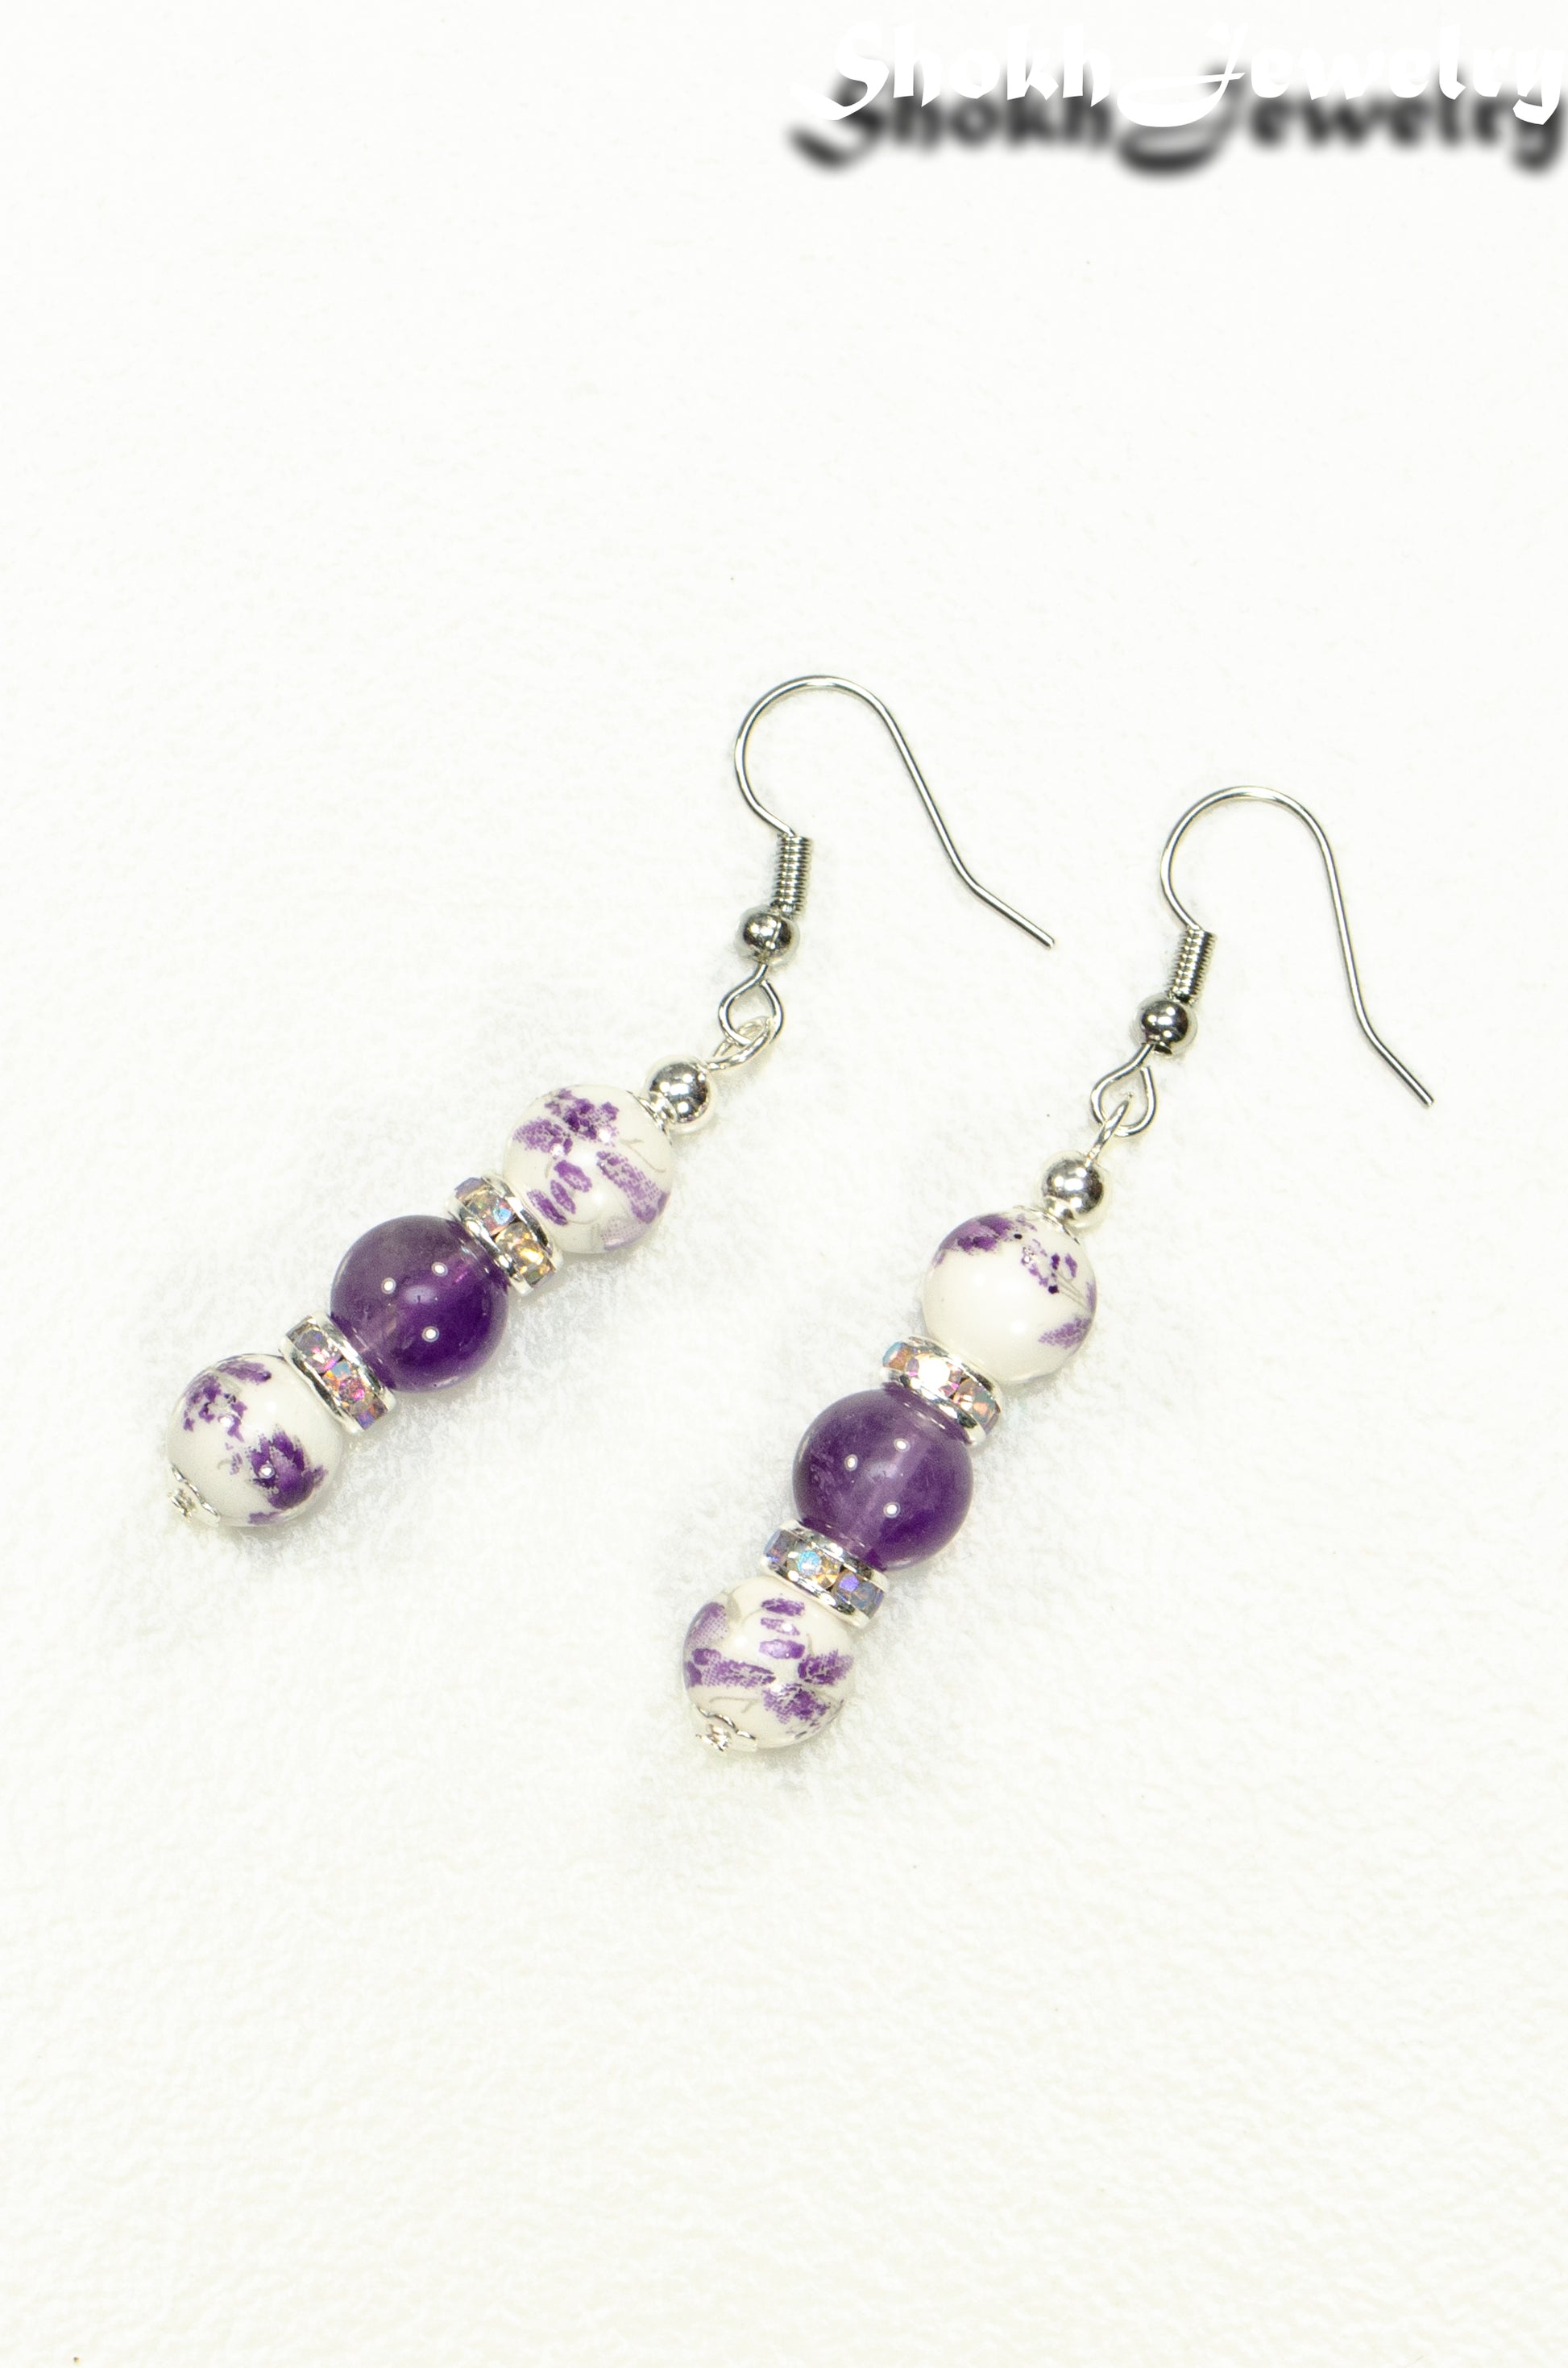 Top view of Long Floral Ceramic Bead and Amethyst Earrings.